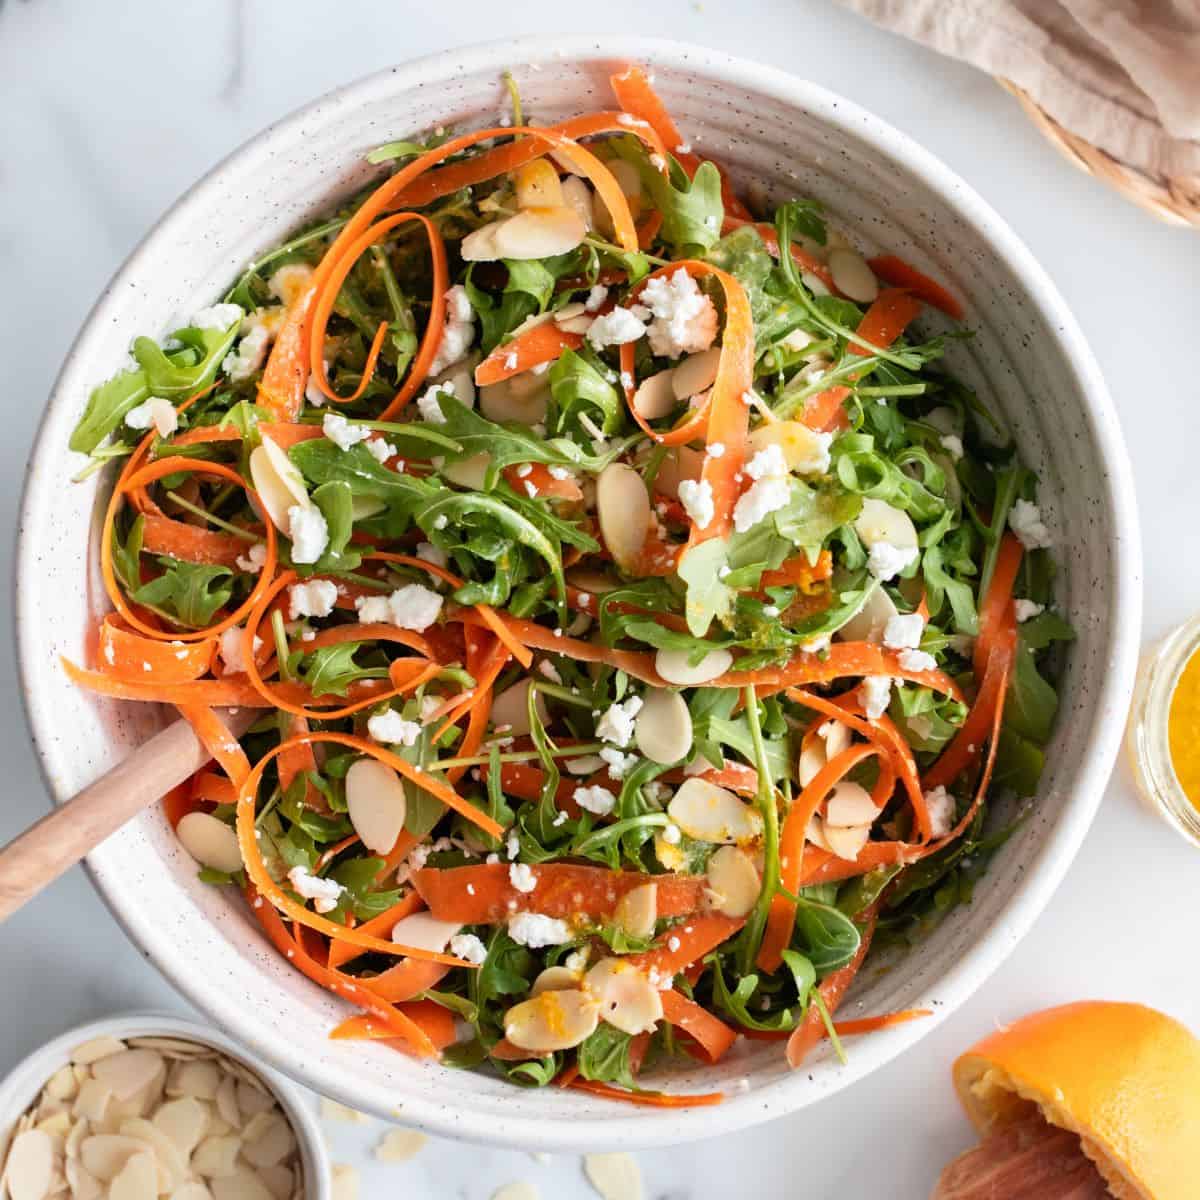 Overhead view of a wooden spoon inside a tossed ribbon carrot salad.